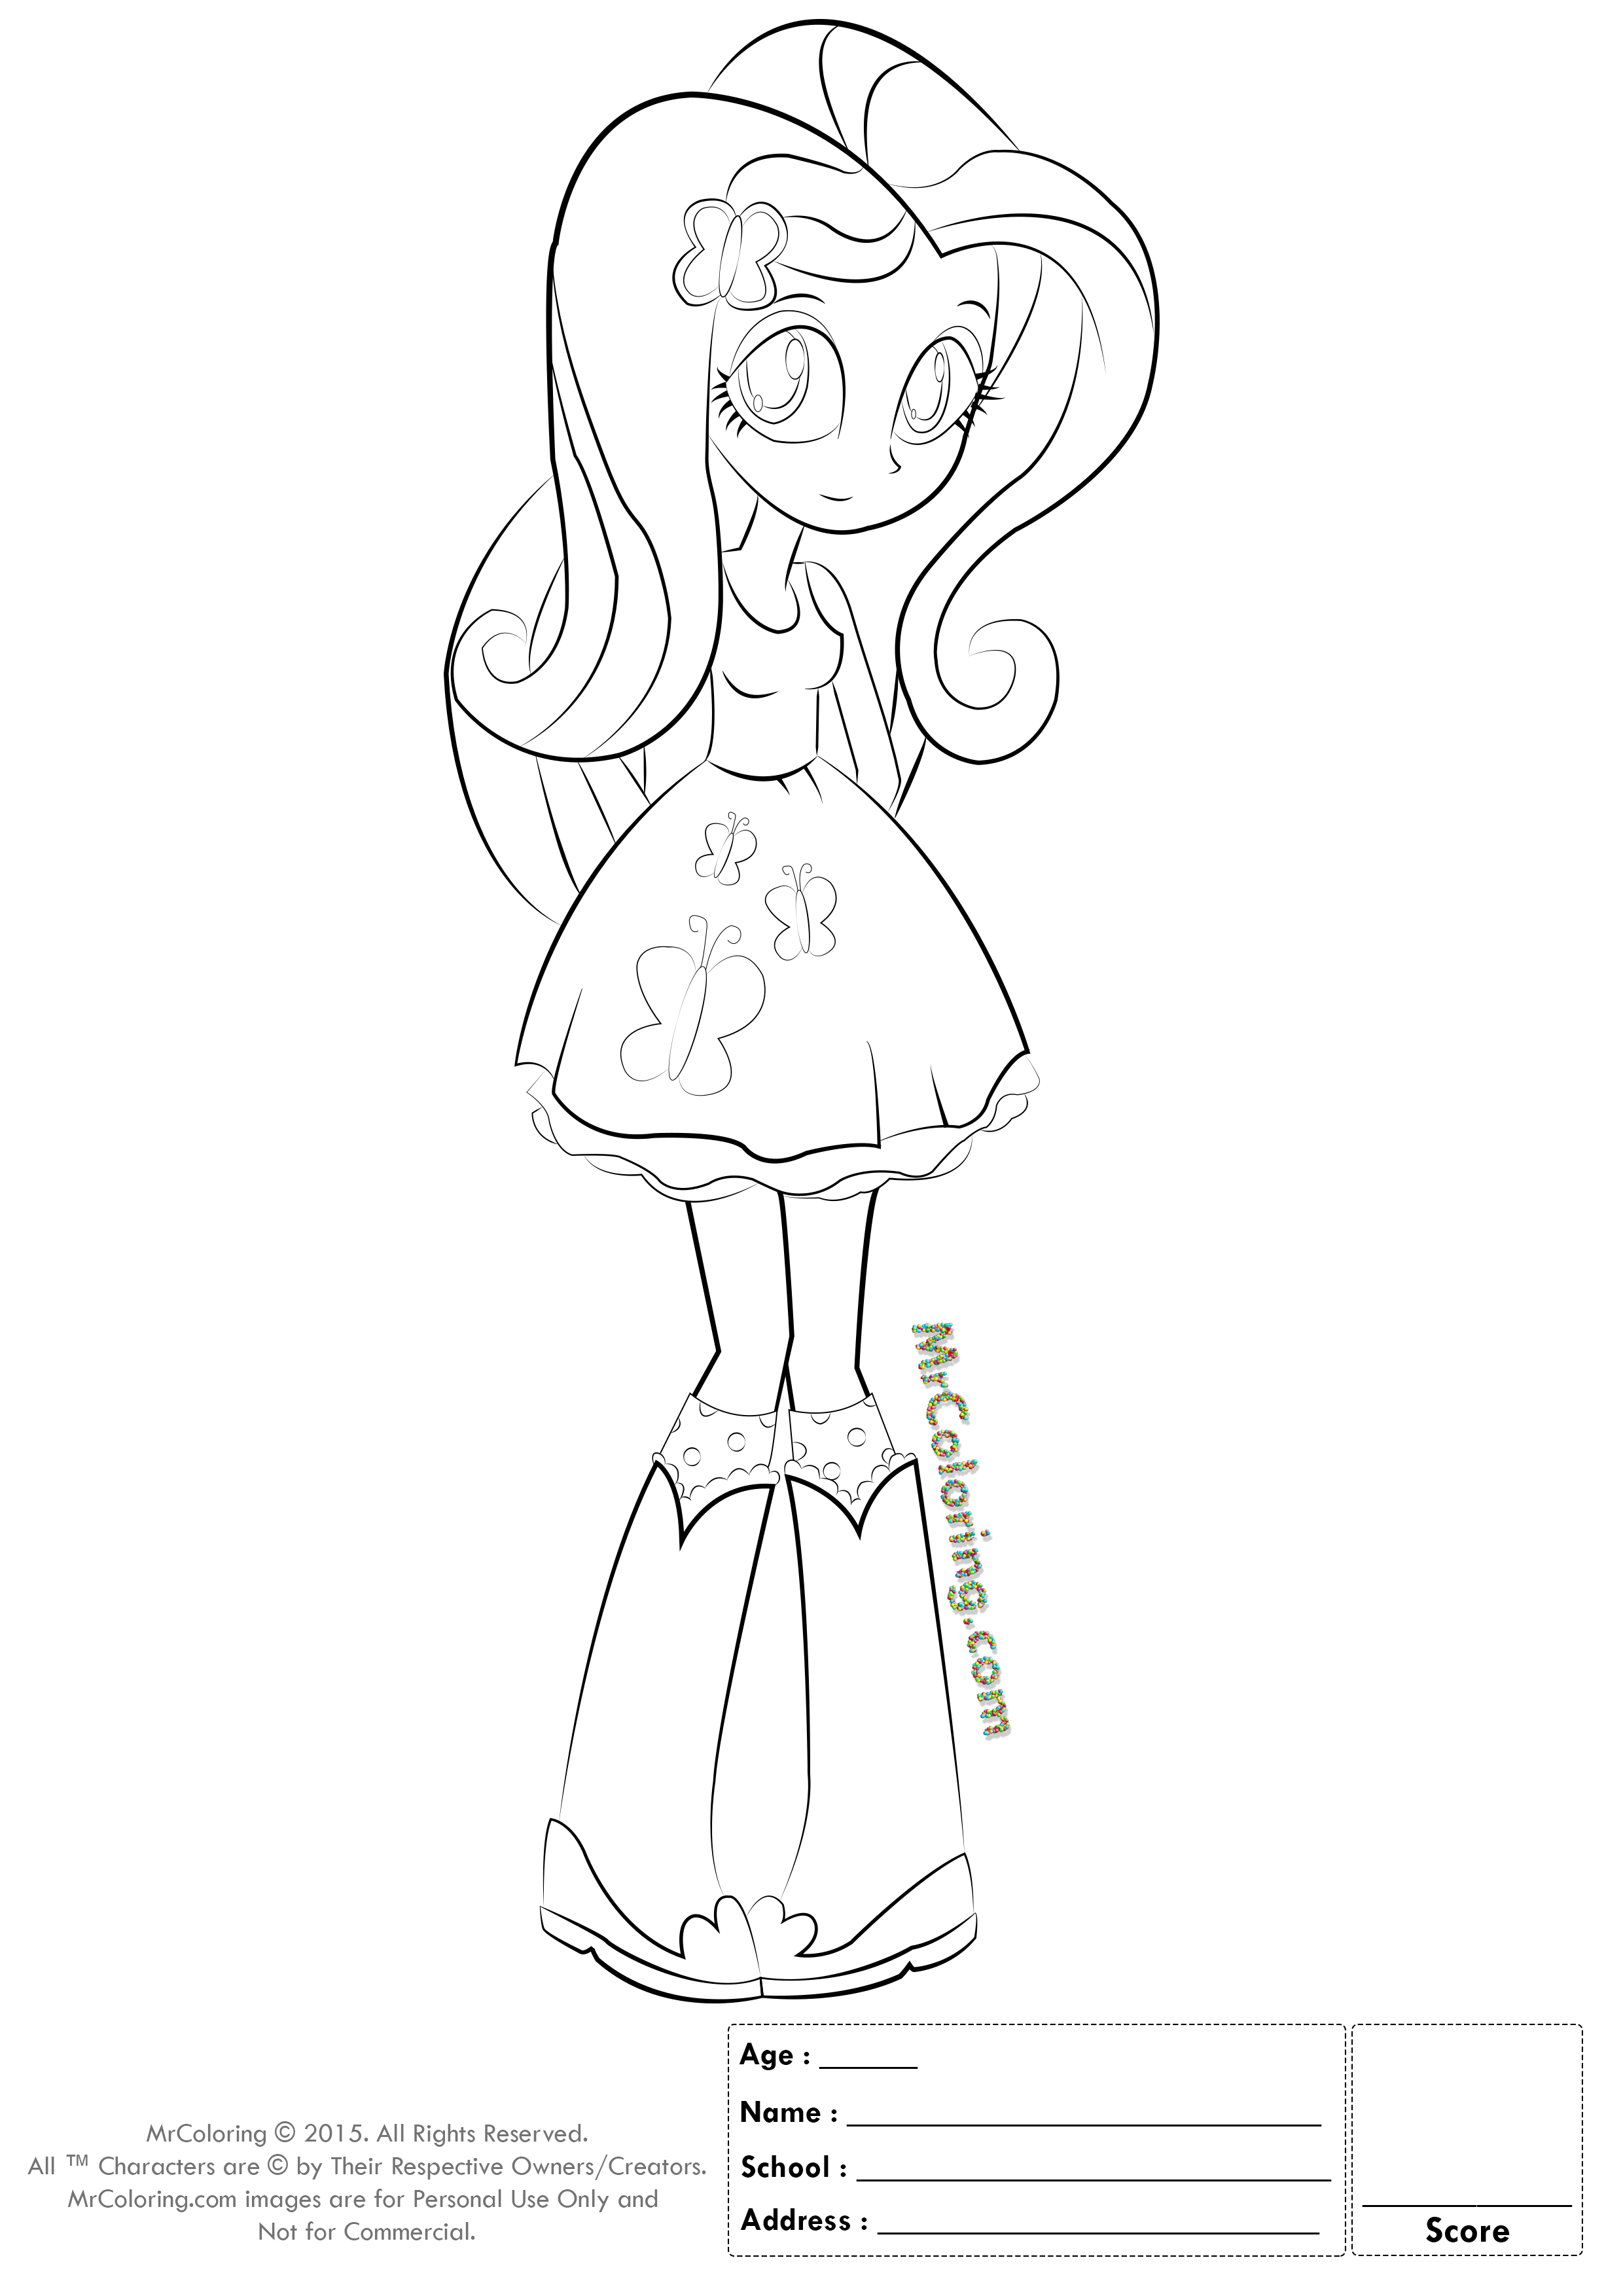 Fluttershy Equestria Girls Coloring Pages - 1 | MrColoring.com